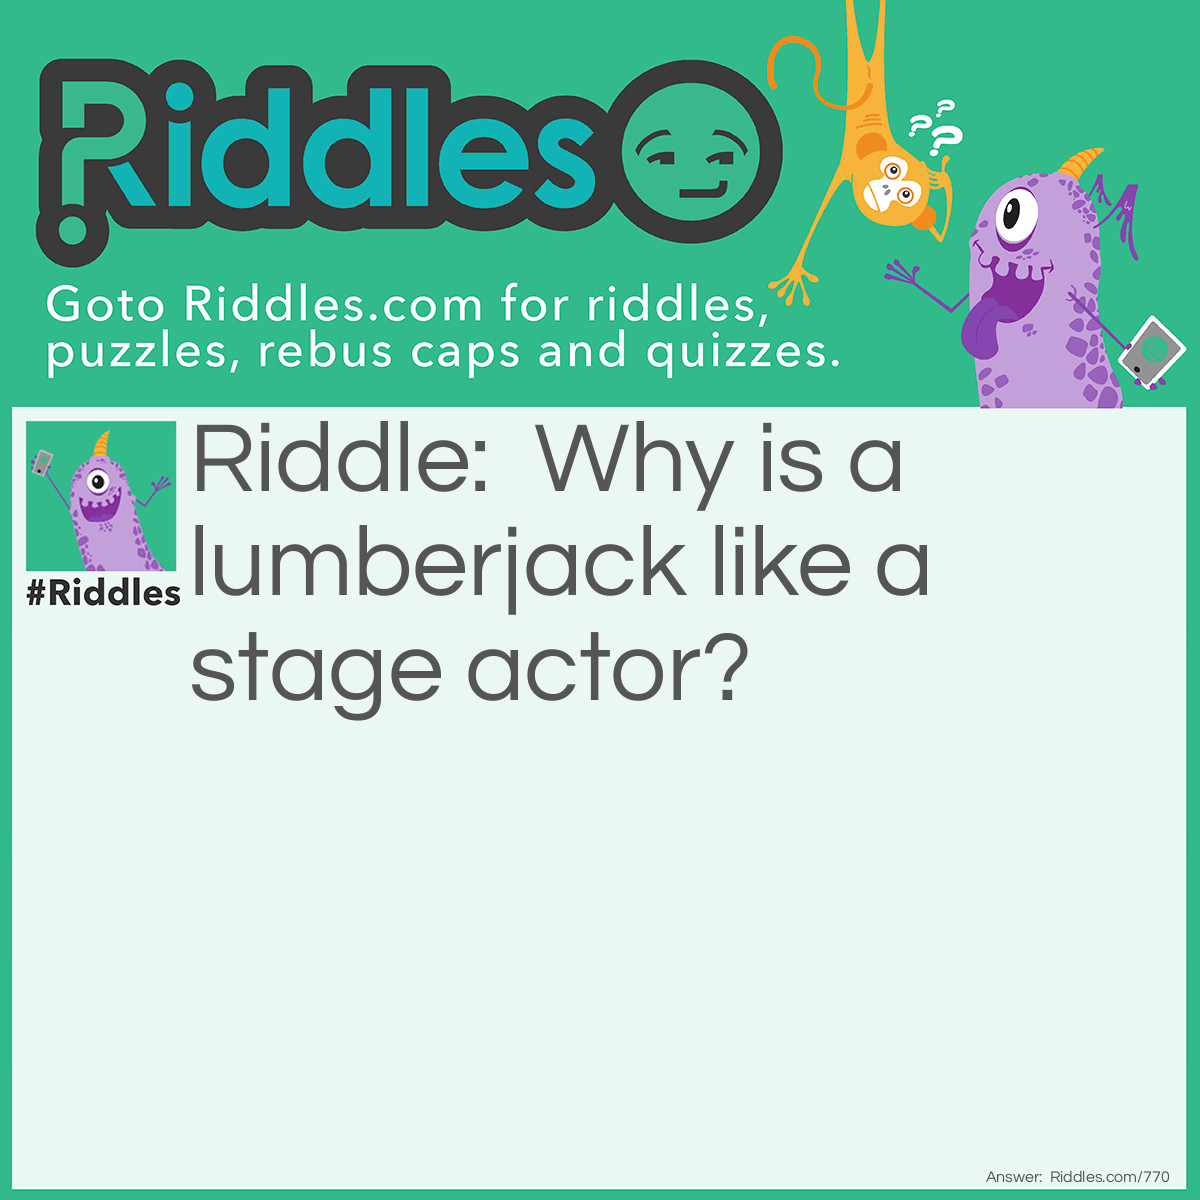 Riddle: Why is a lumberjack like a stage actor? Answer: He is known by his axe (acts).